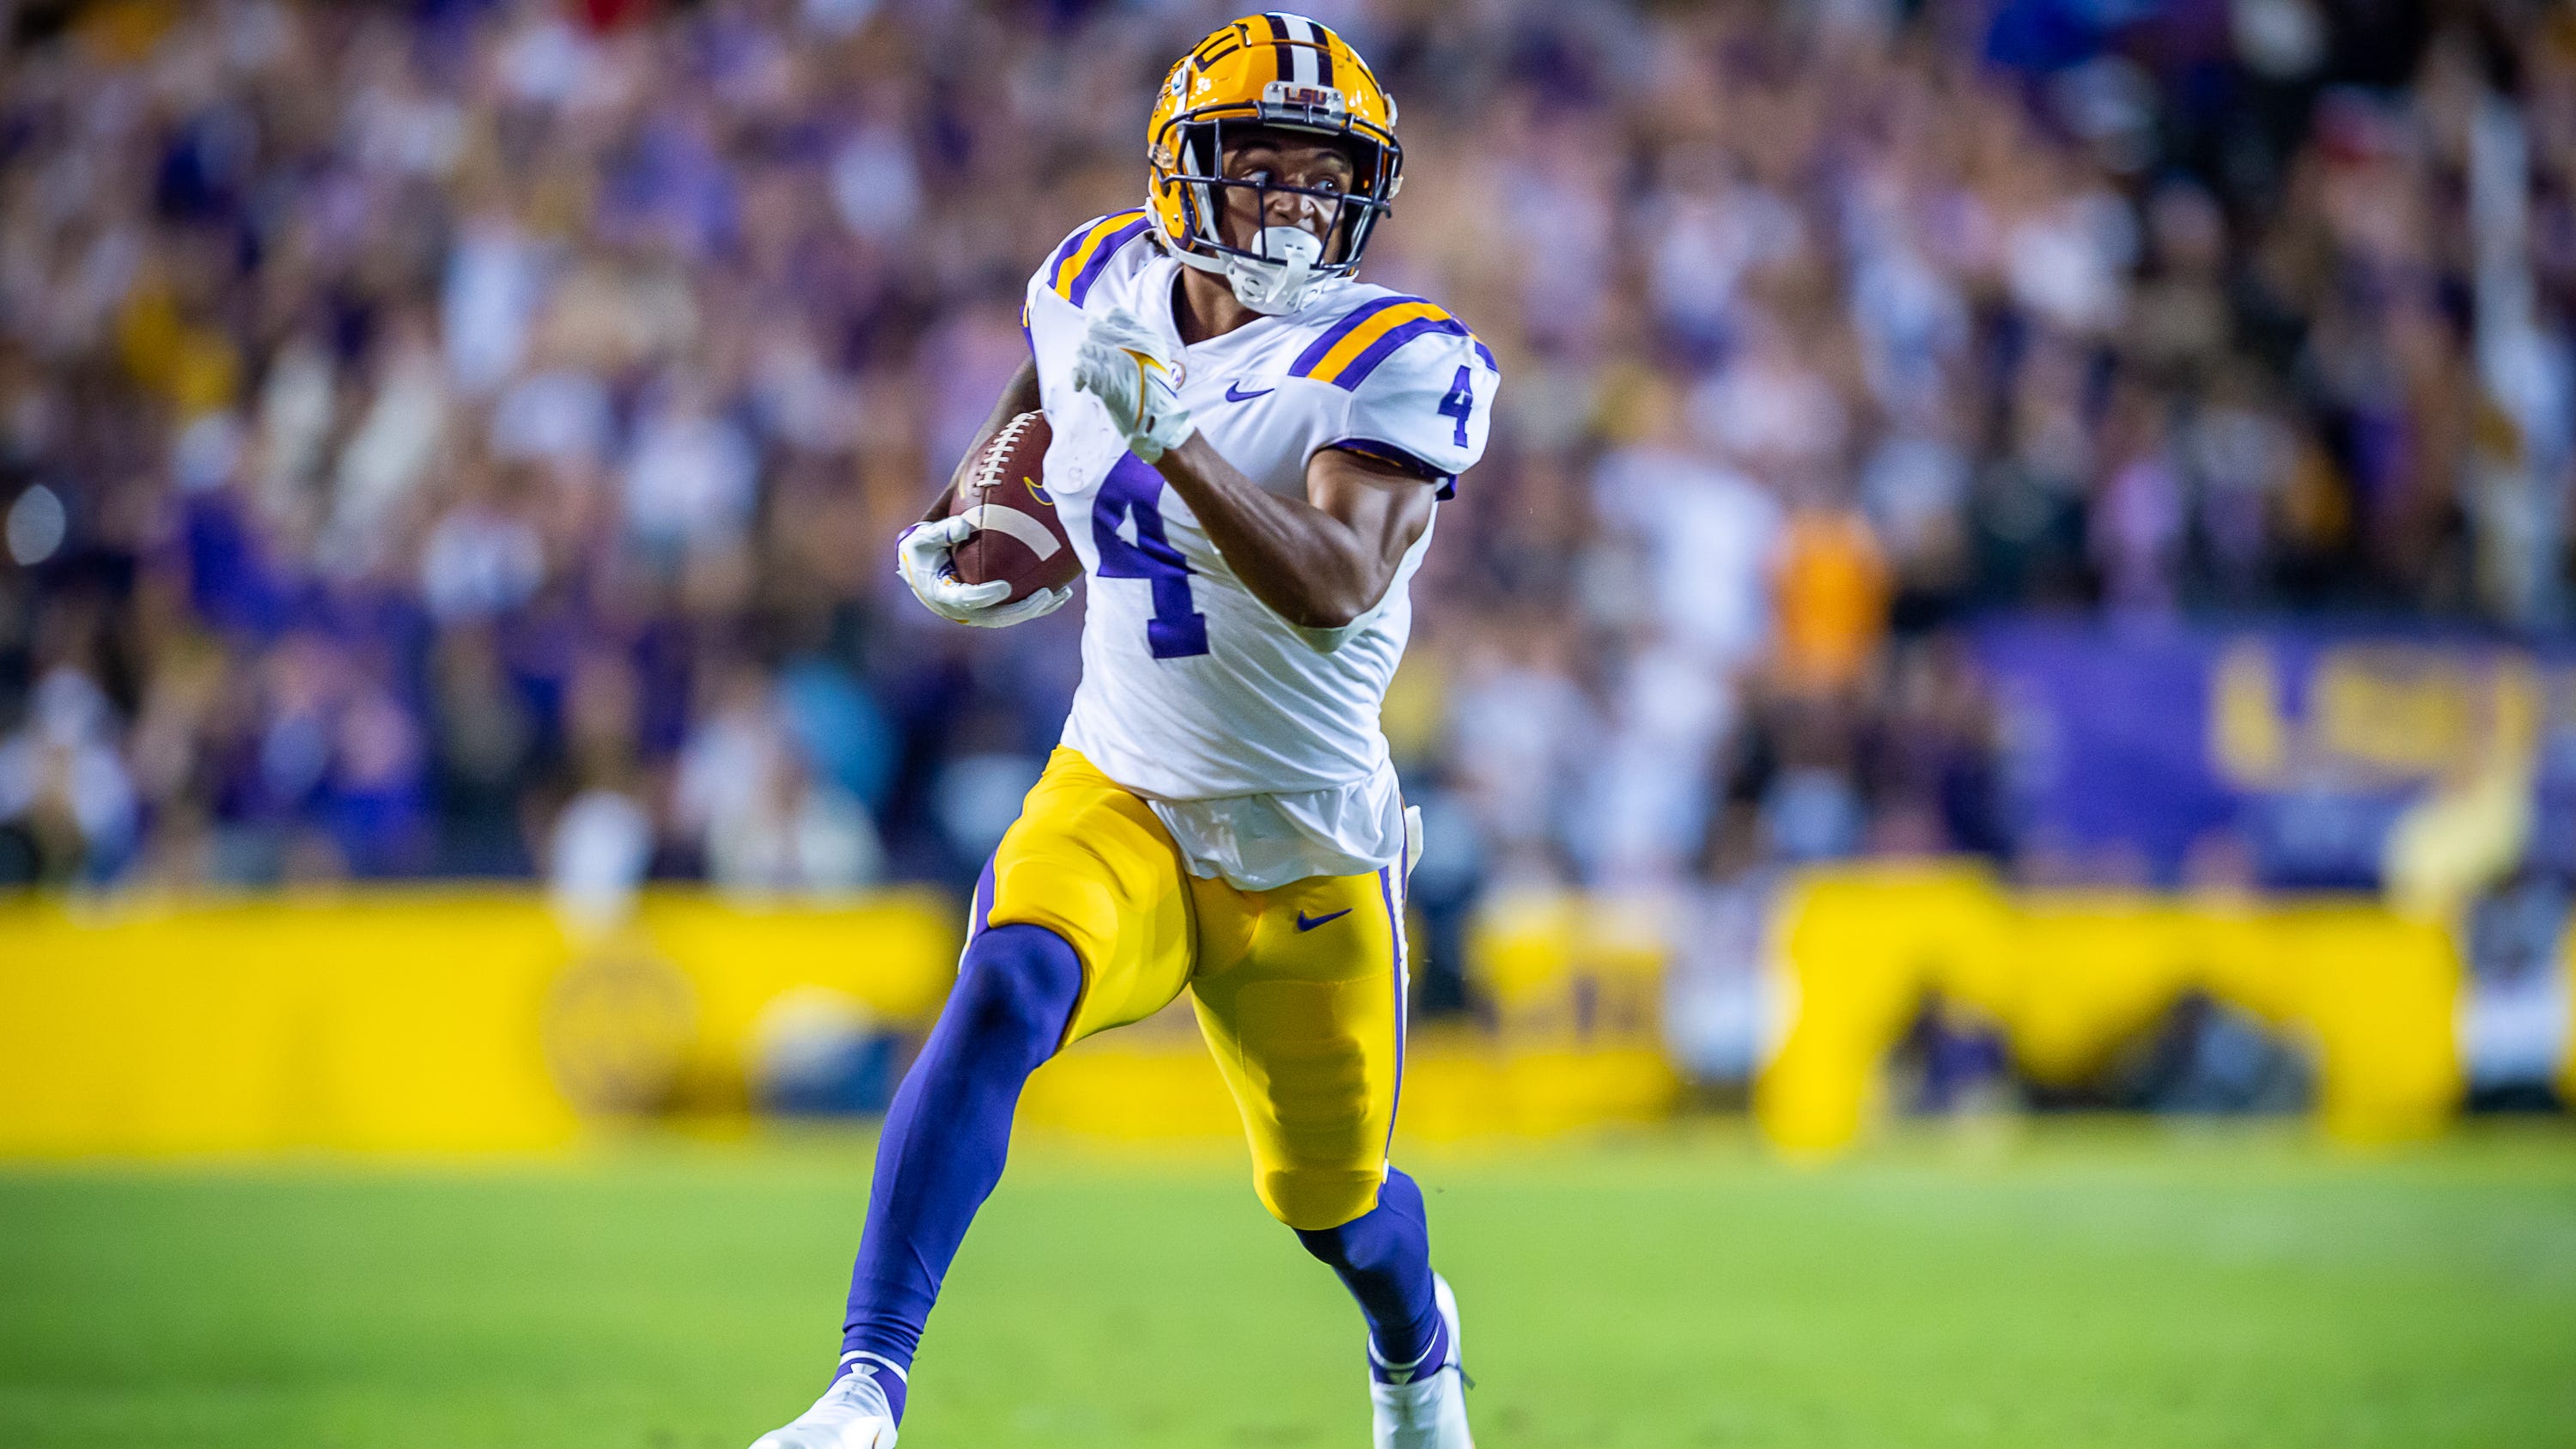 LSU football Schedule, TV time update from matchup vs. UAB